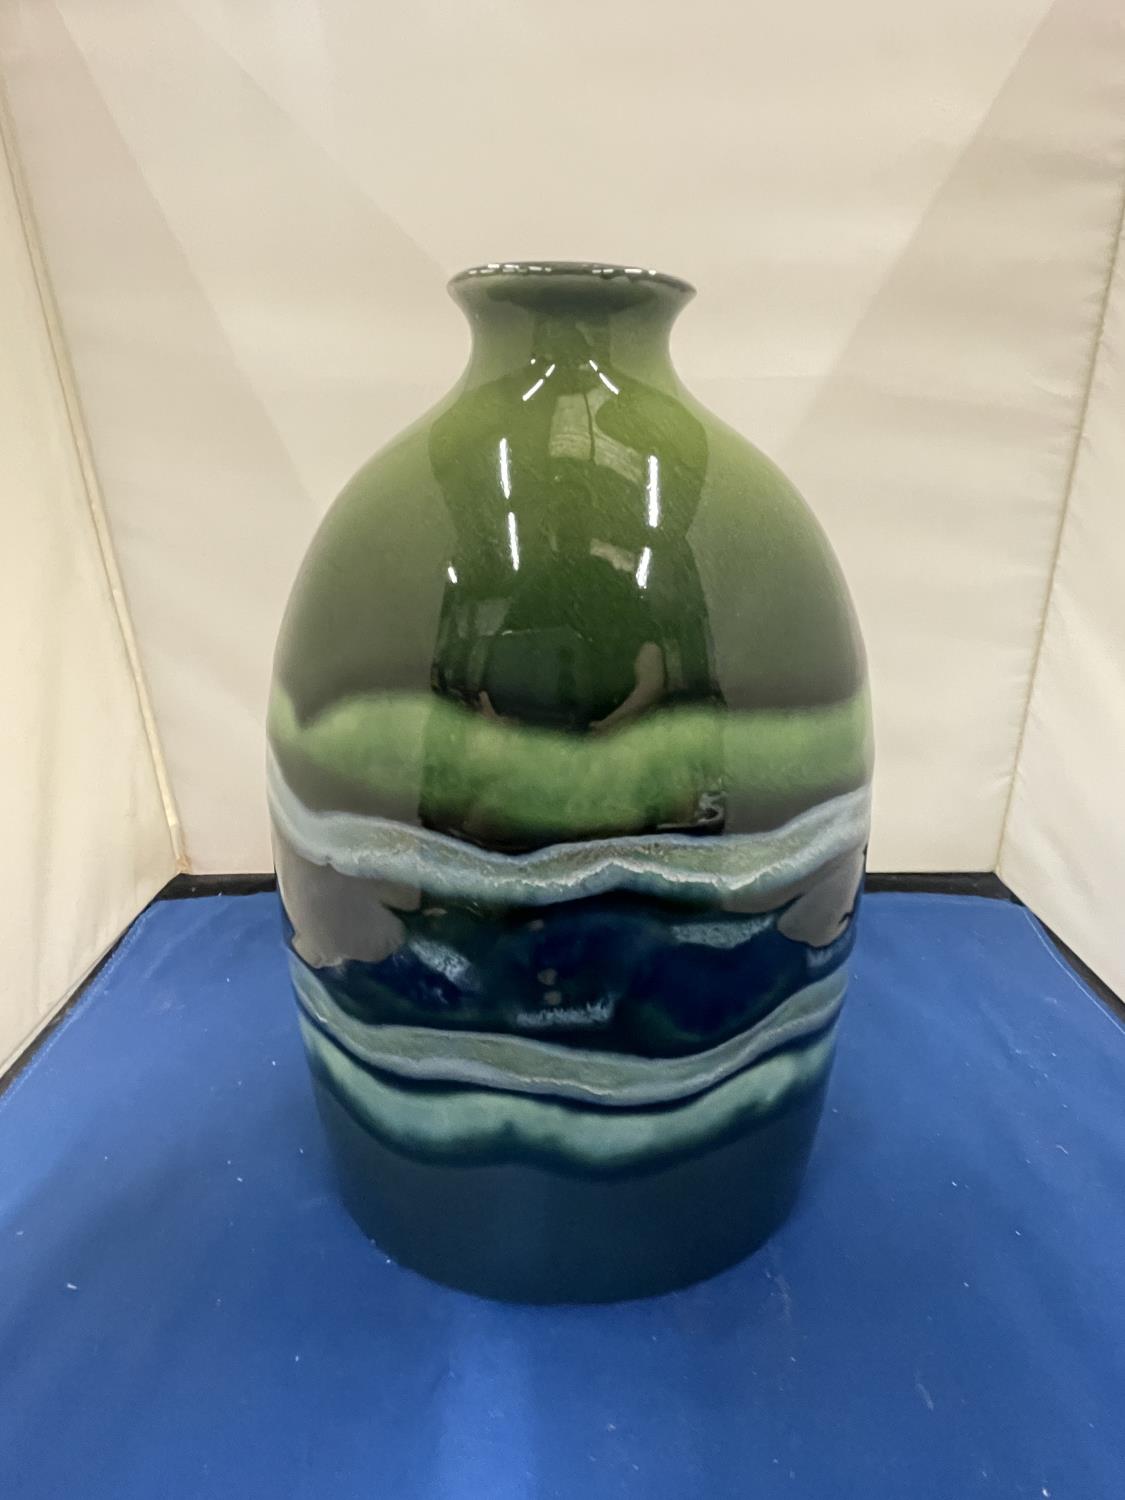 A POOLE POTTERY BOTTLE VASE MAYA DESIGN WITH ORIGINAL BOX 23CM TALL - Image 3 of 12